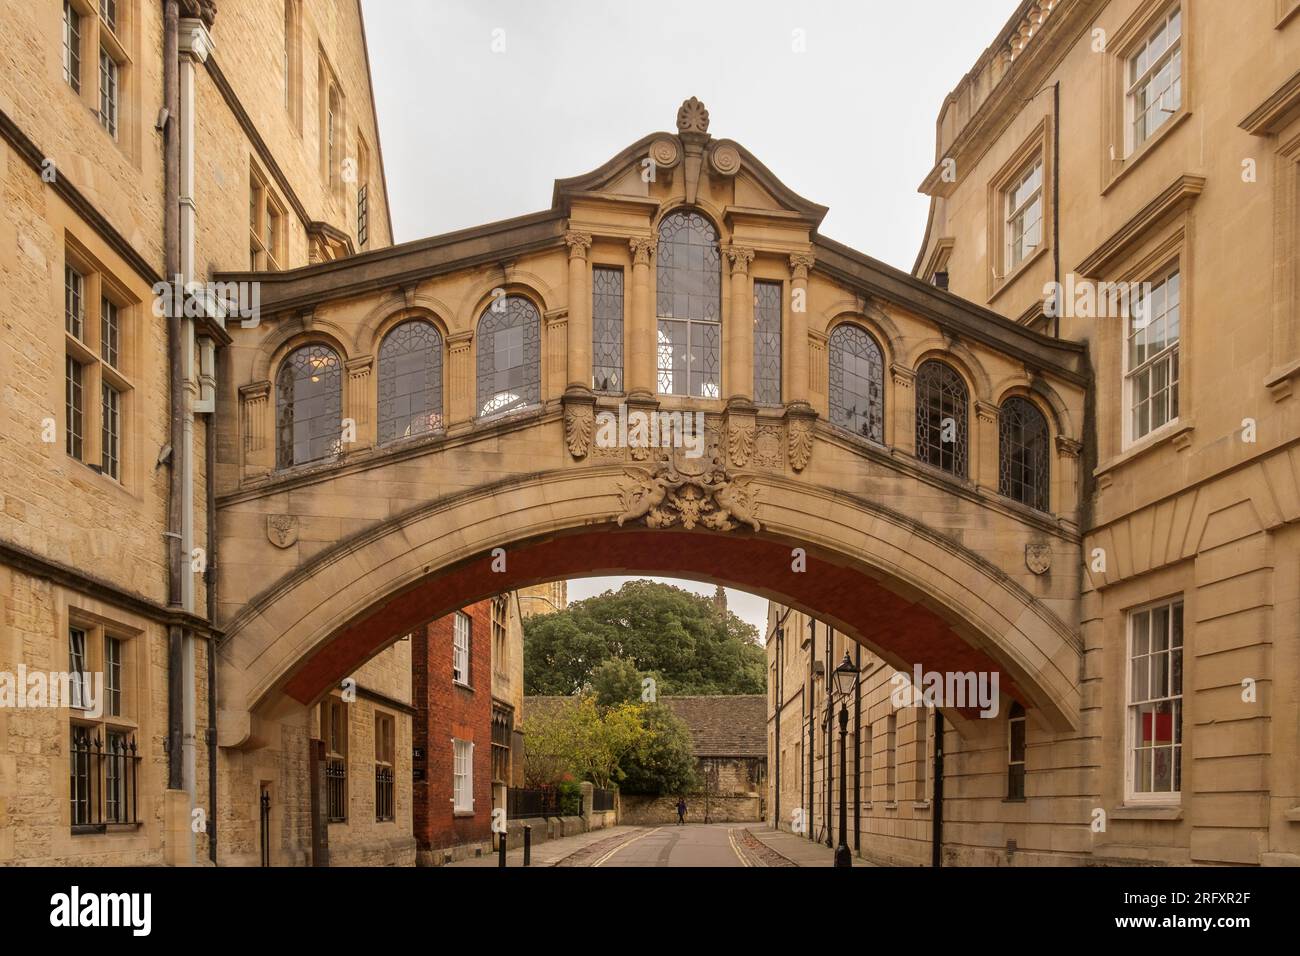 Oxford, United Kingdom- November 12th 2022: Hertford Bridge, also known as The Bridge of Sighs due to its resemblance to the Bridge  in Venice. Stock Photo